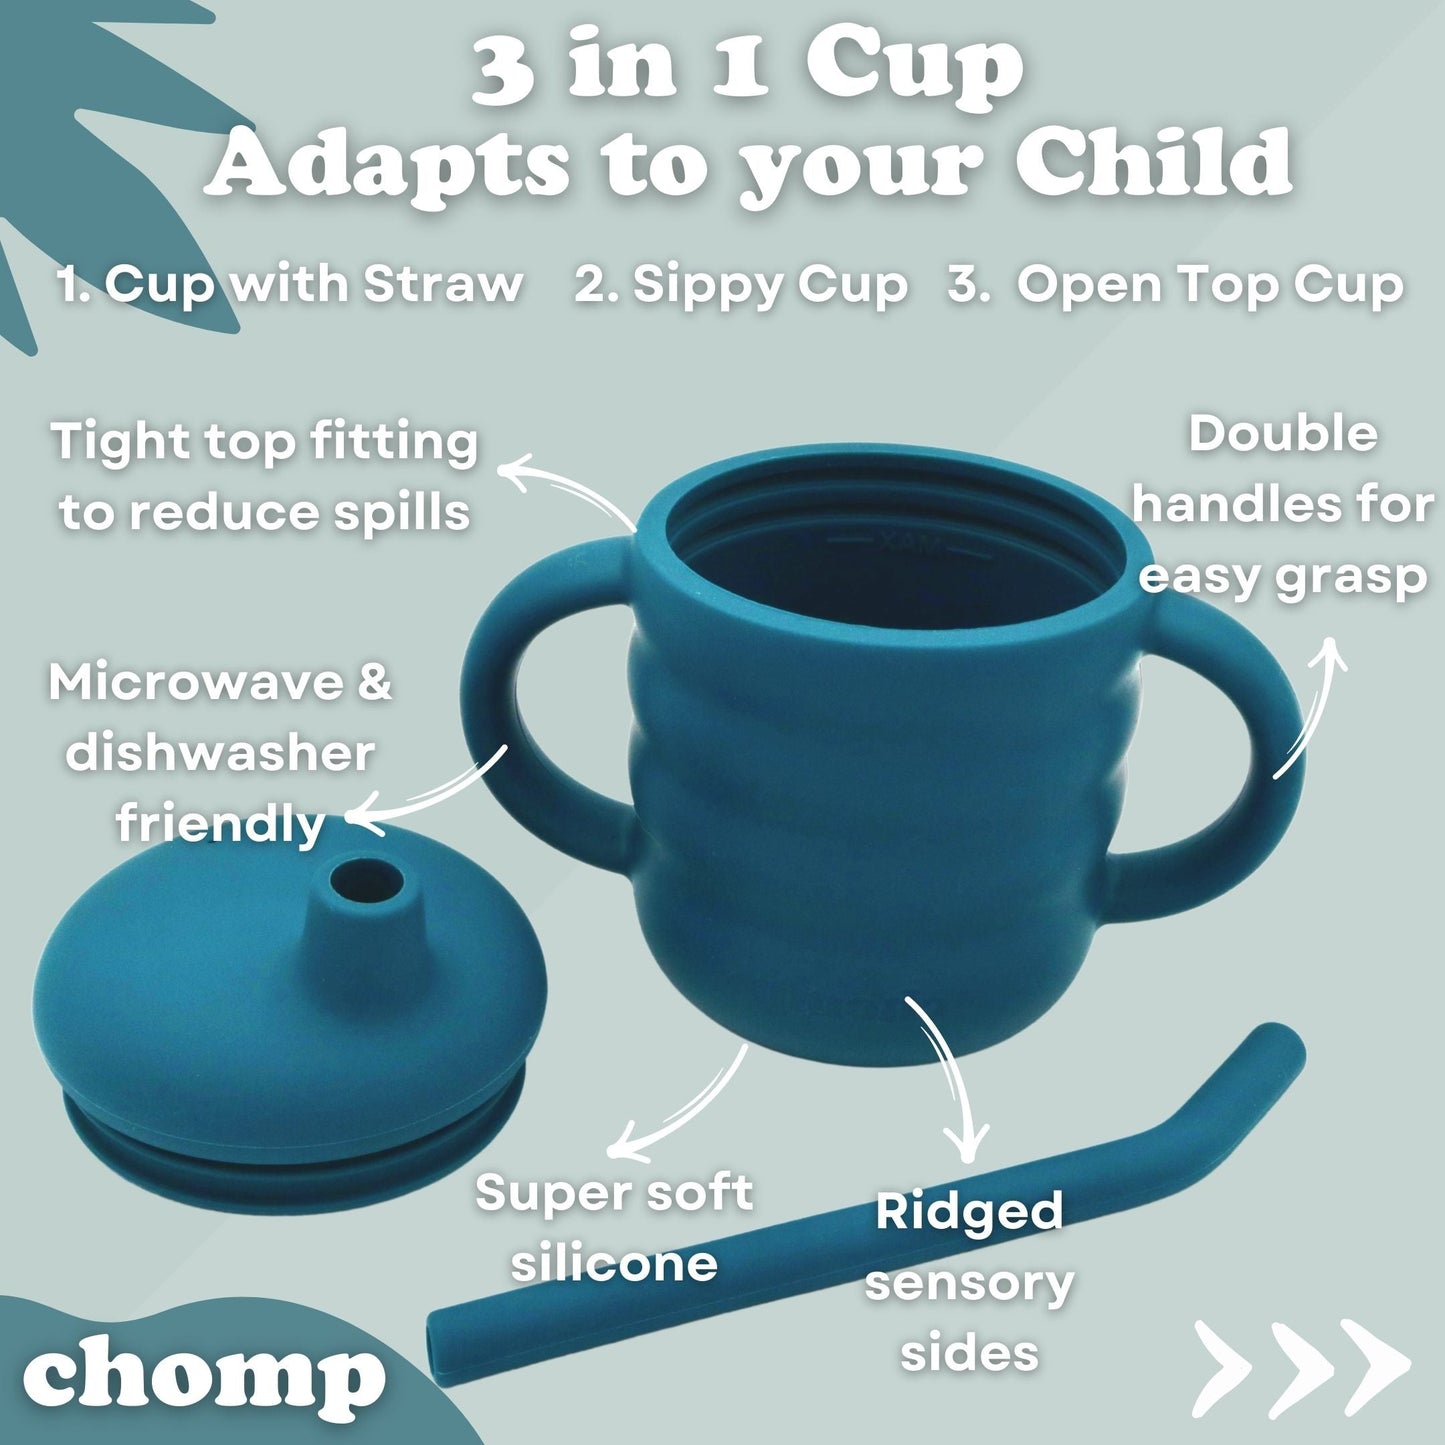 all-in-1 baby and toddler cup